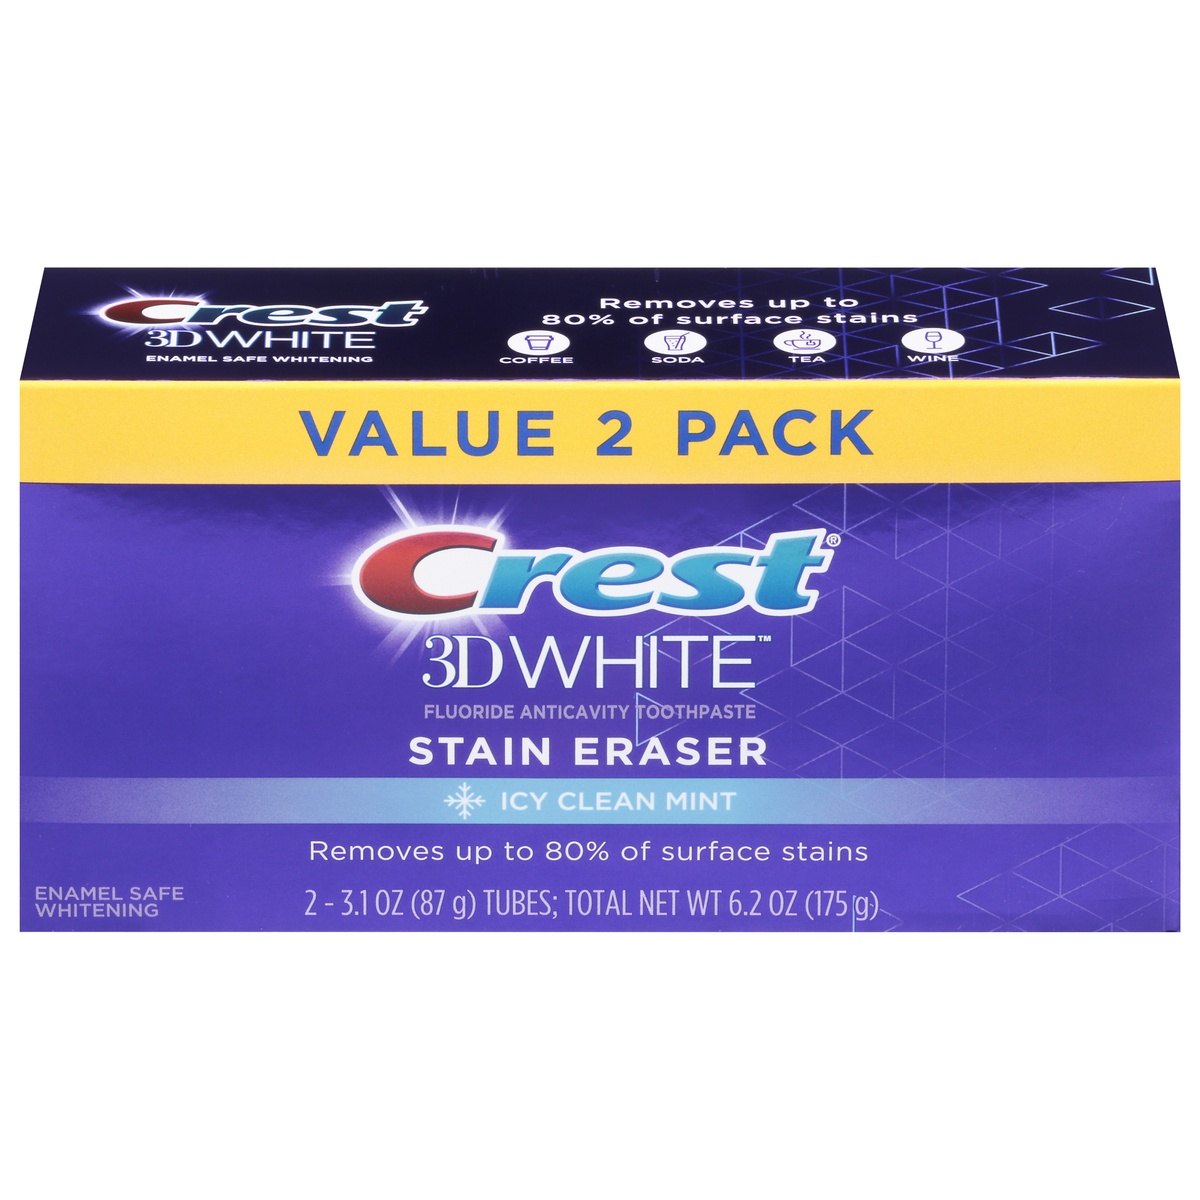 slide 10 of 10, Crest 3D White Stain Eraser Icy Clean Mint Toothpaste Value 2 Pack 2 - 3.1 oz Tubes, 6.1 oz